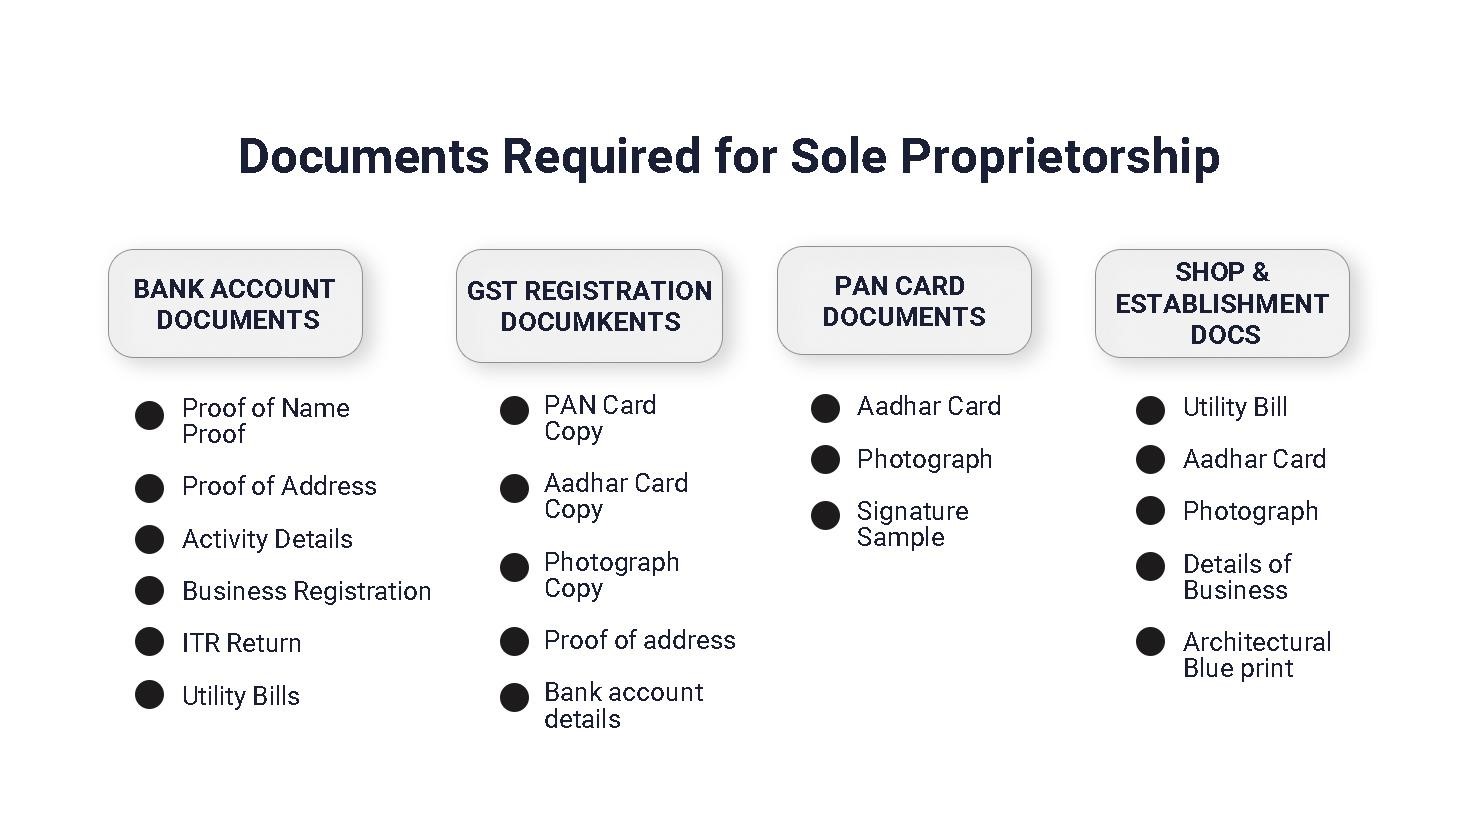 Documents Required for Opening a Proprietorship Bank Account